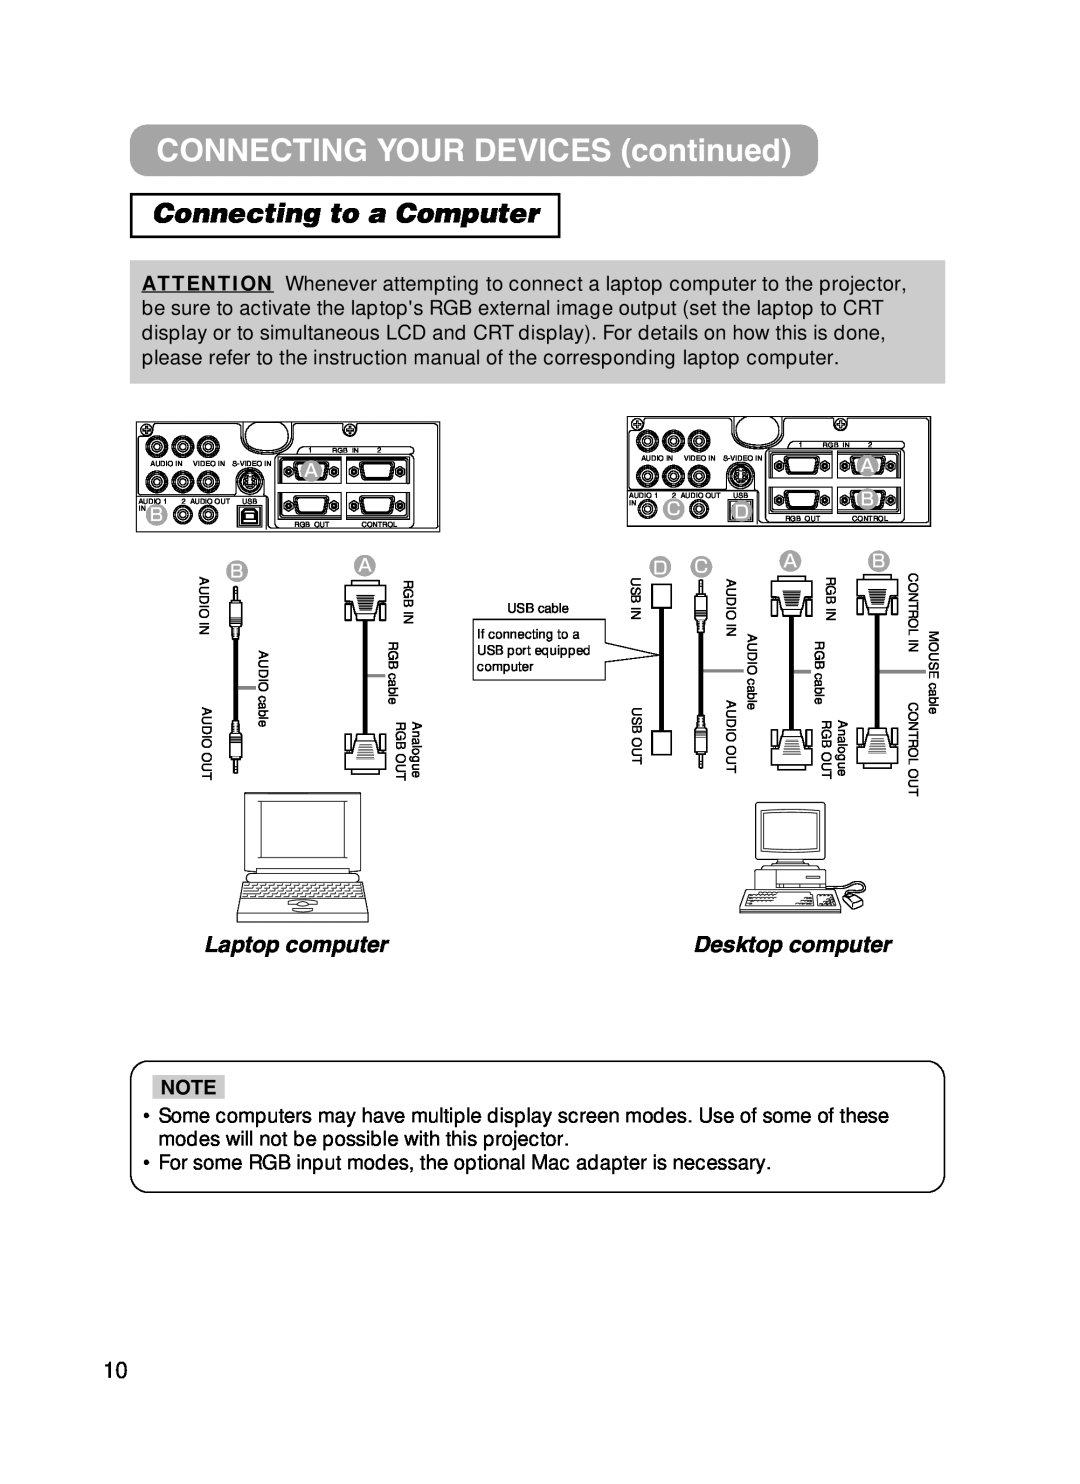 Hitachi CPX385W user manual CONNECTING YOUR DEVICES continued, Connecting to a Computer, Laptop computer, Desktop computer 